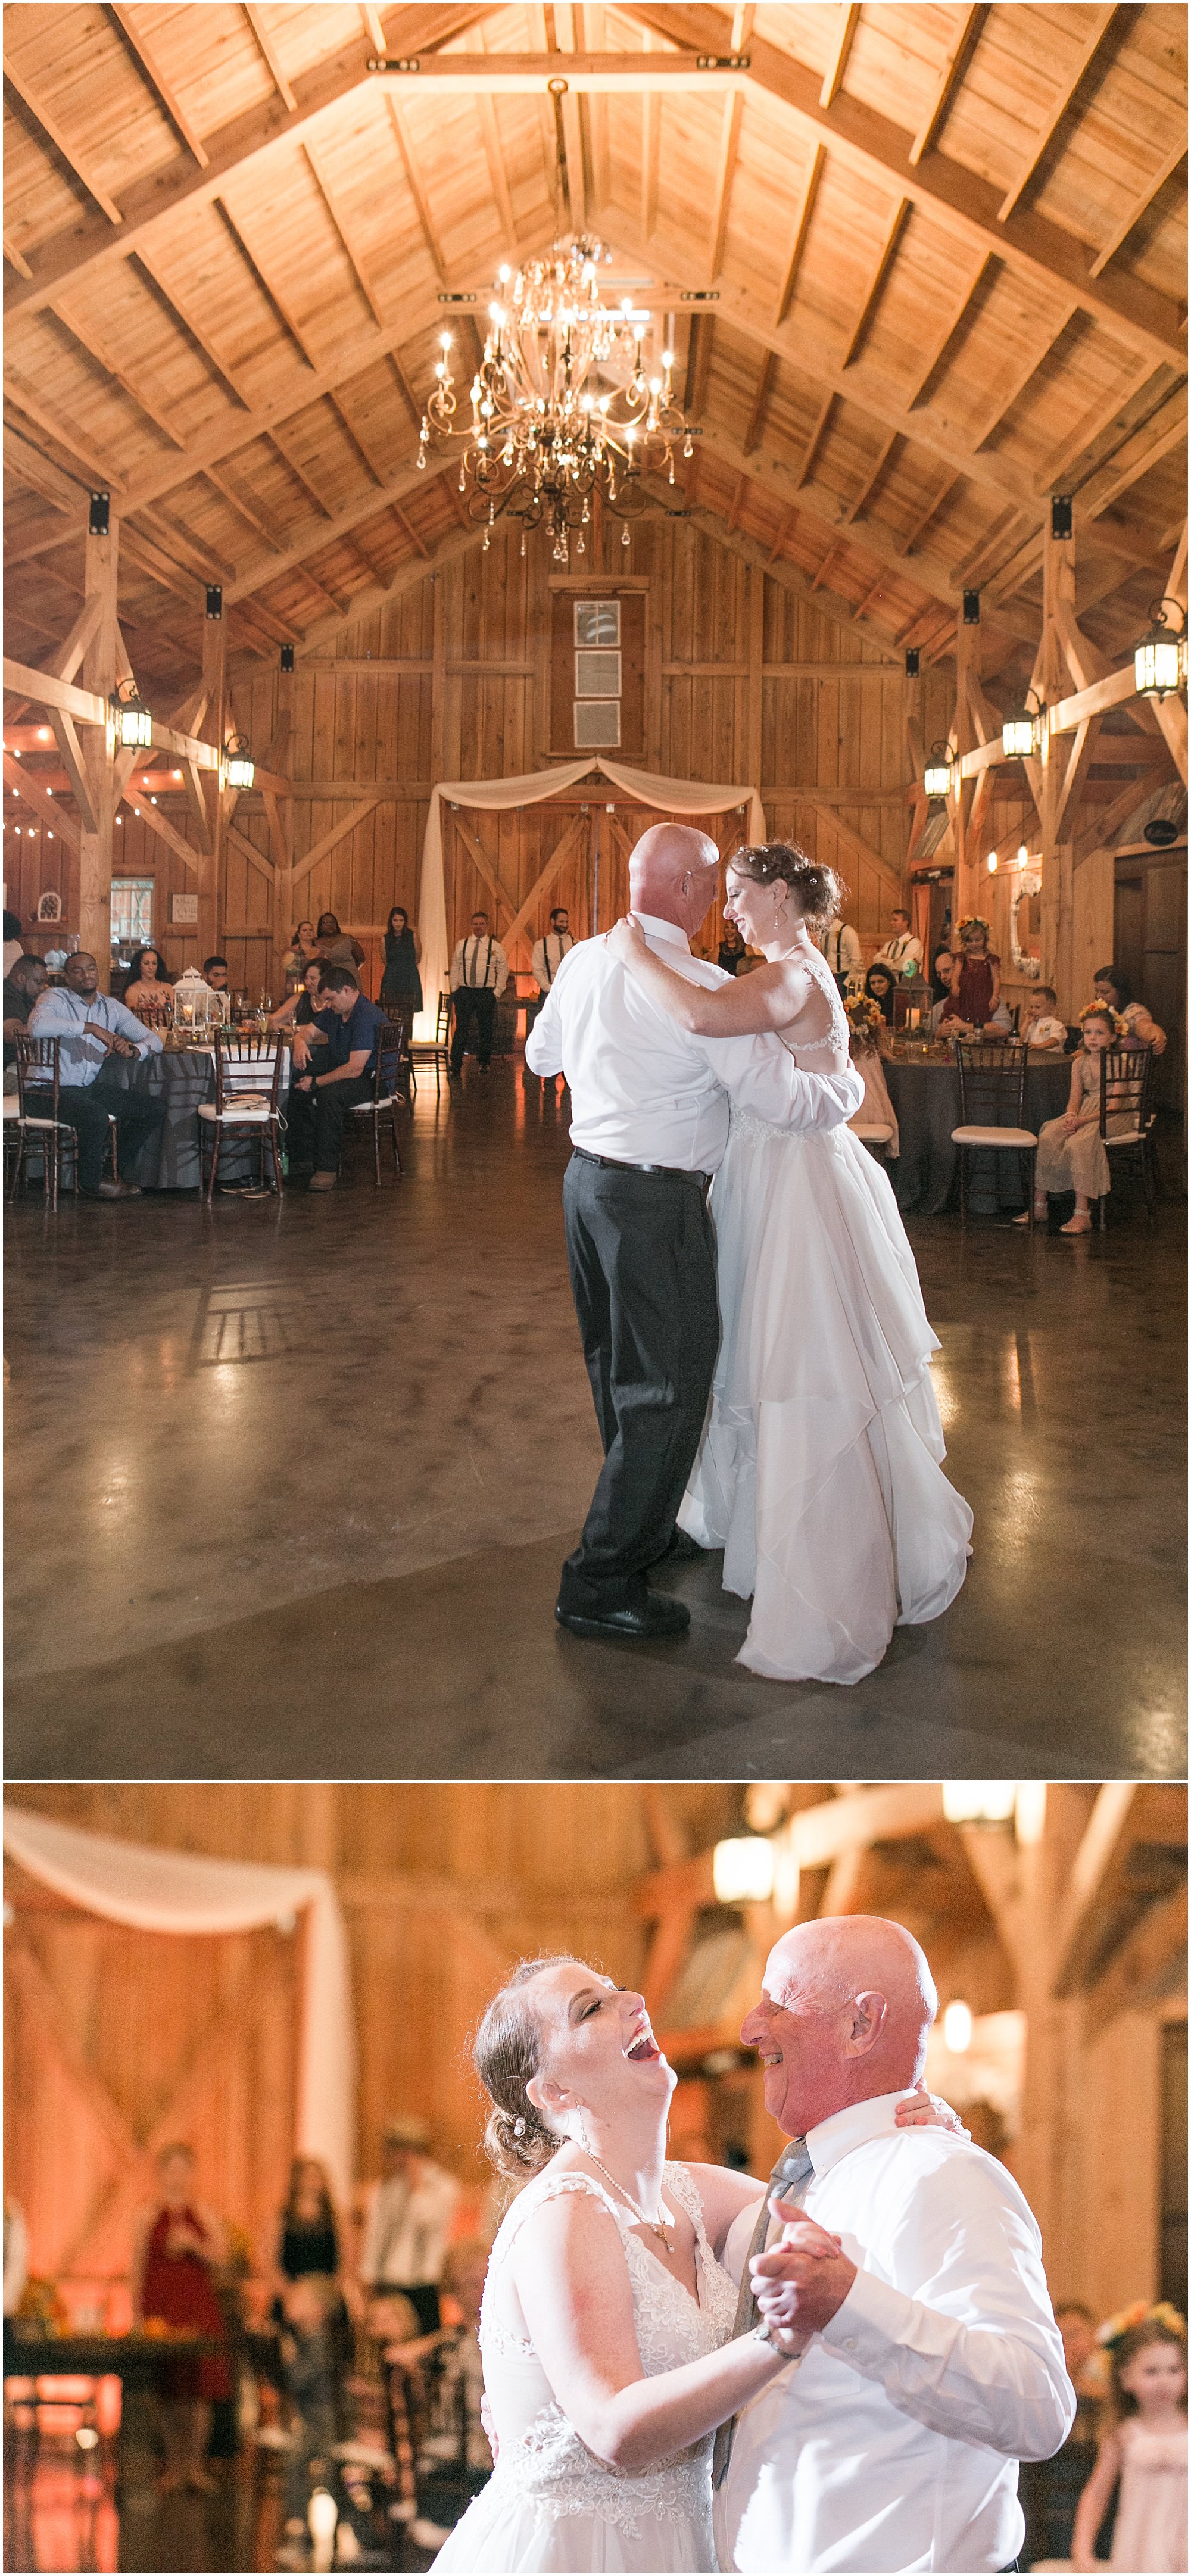 Bride dancing with her dad at her wedding reception